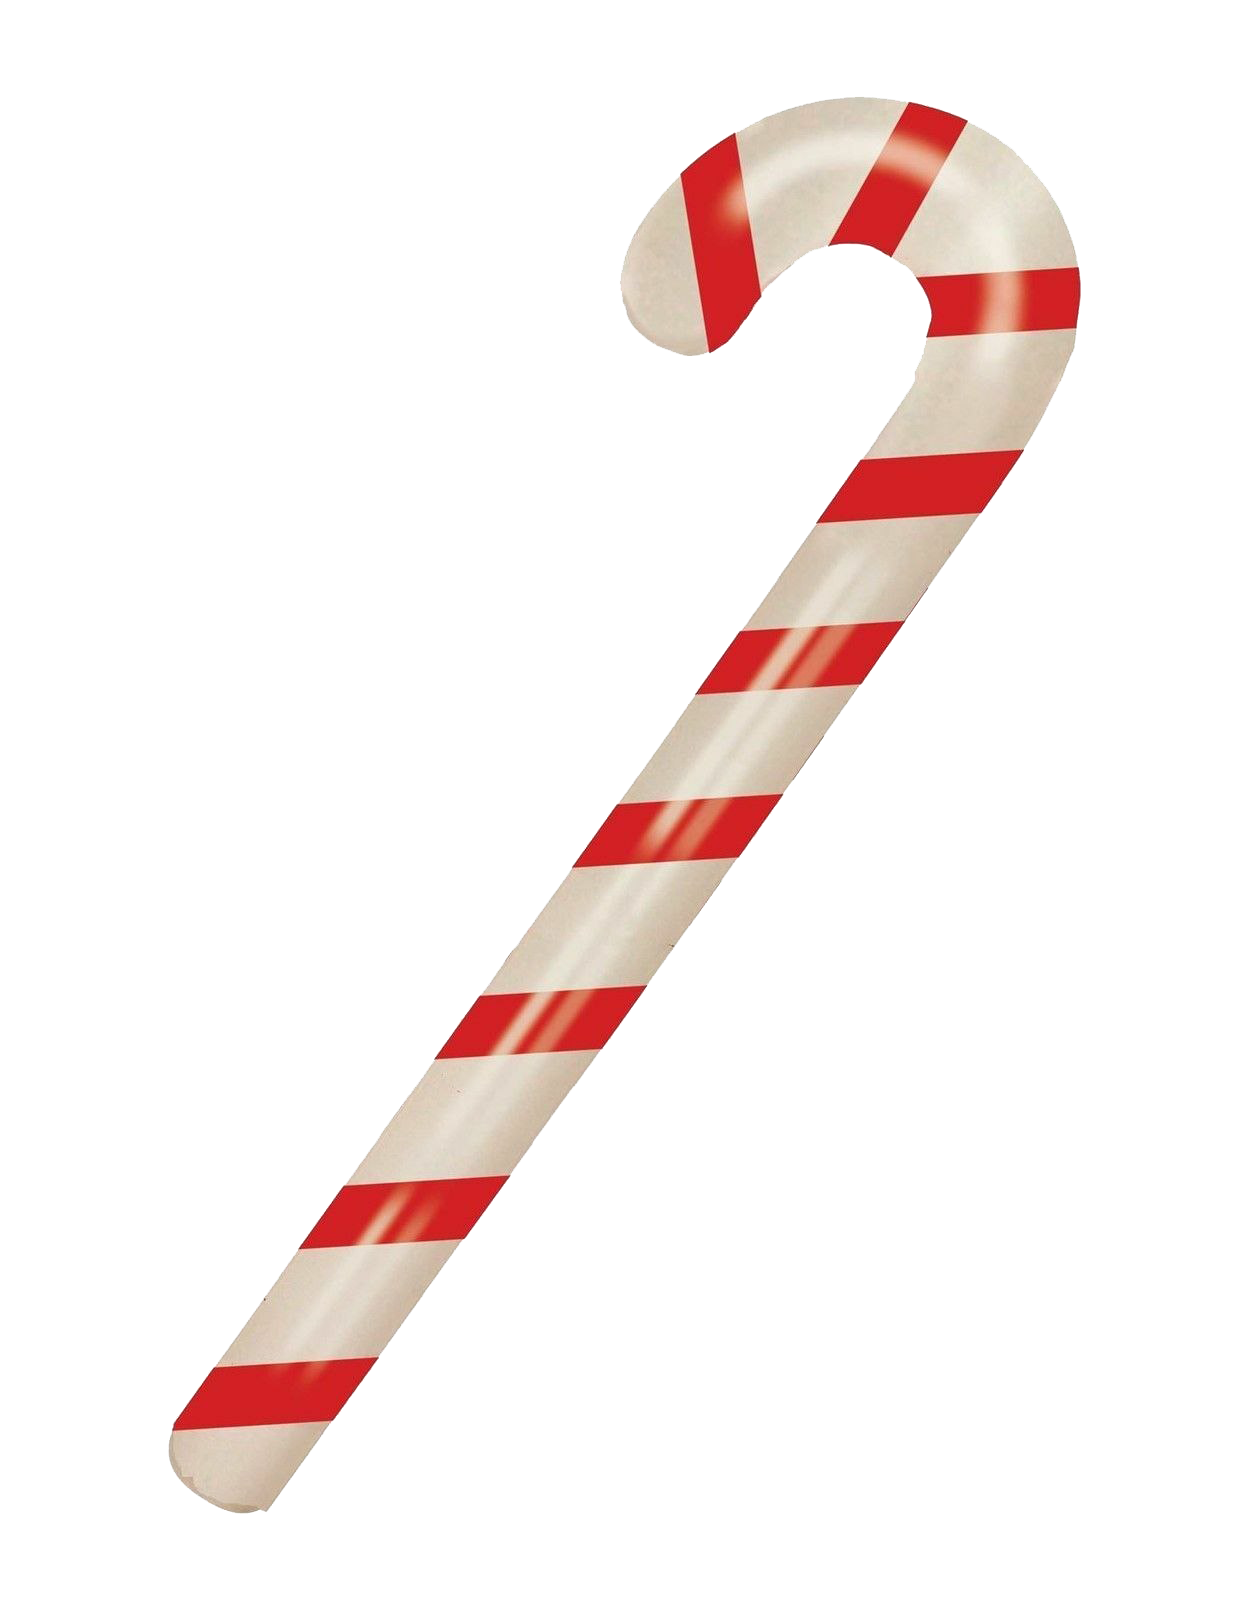 Peppermint Candy Cane PNG Image Background